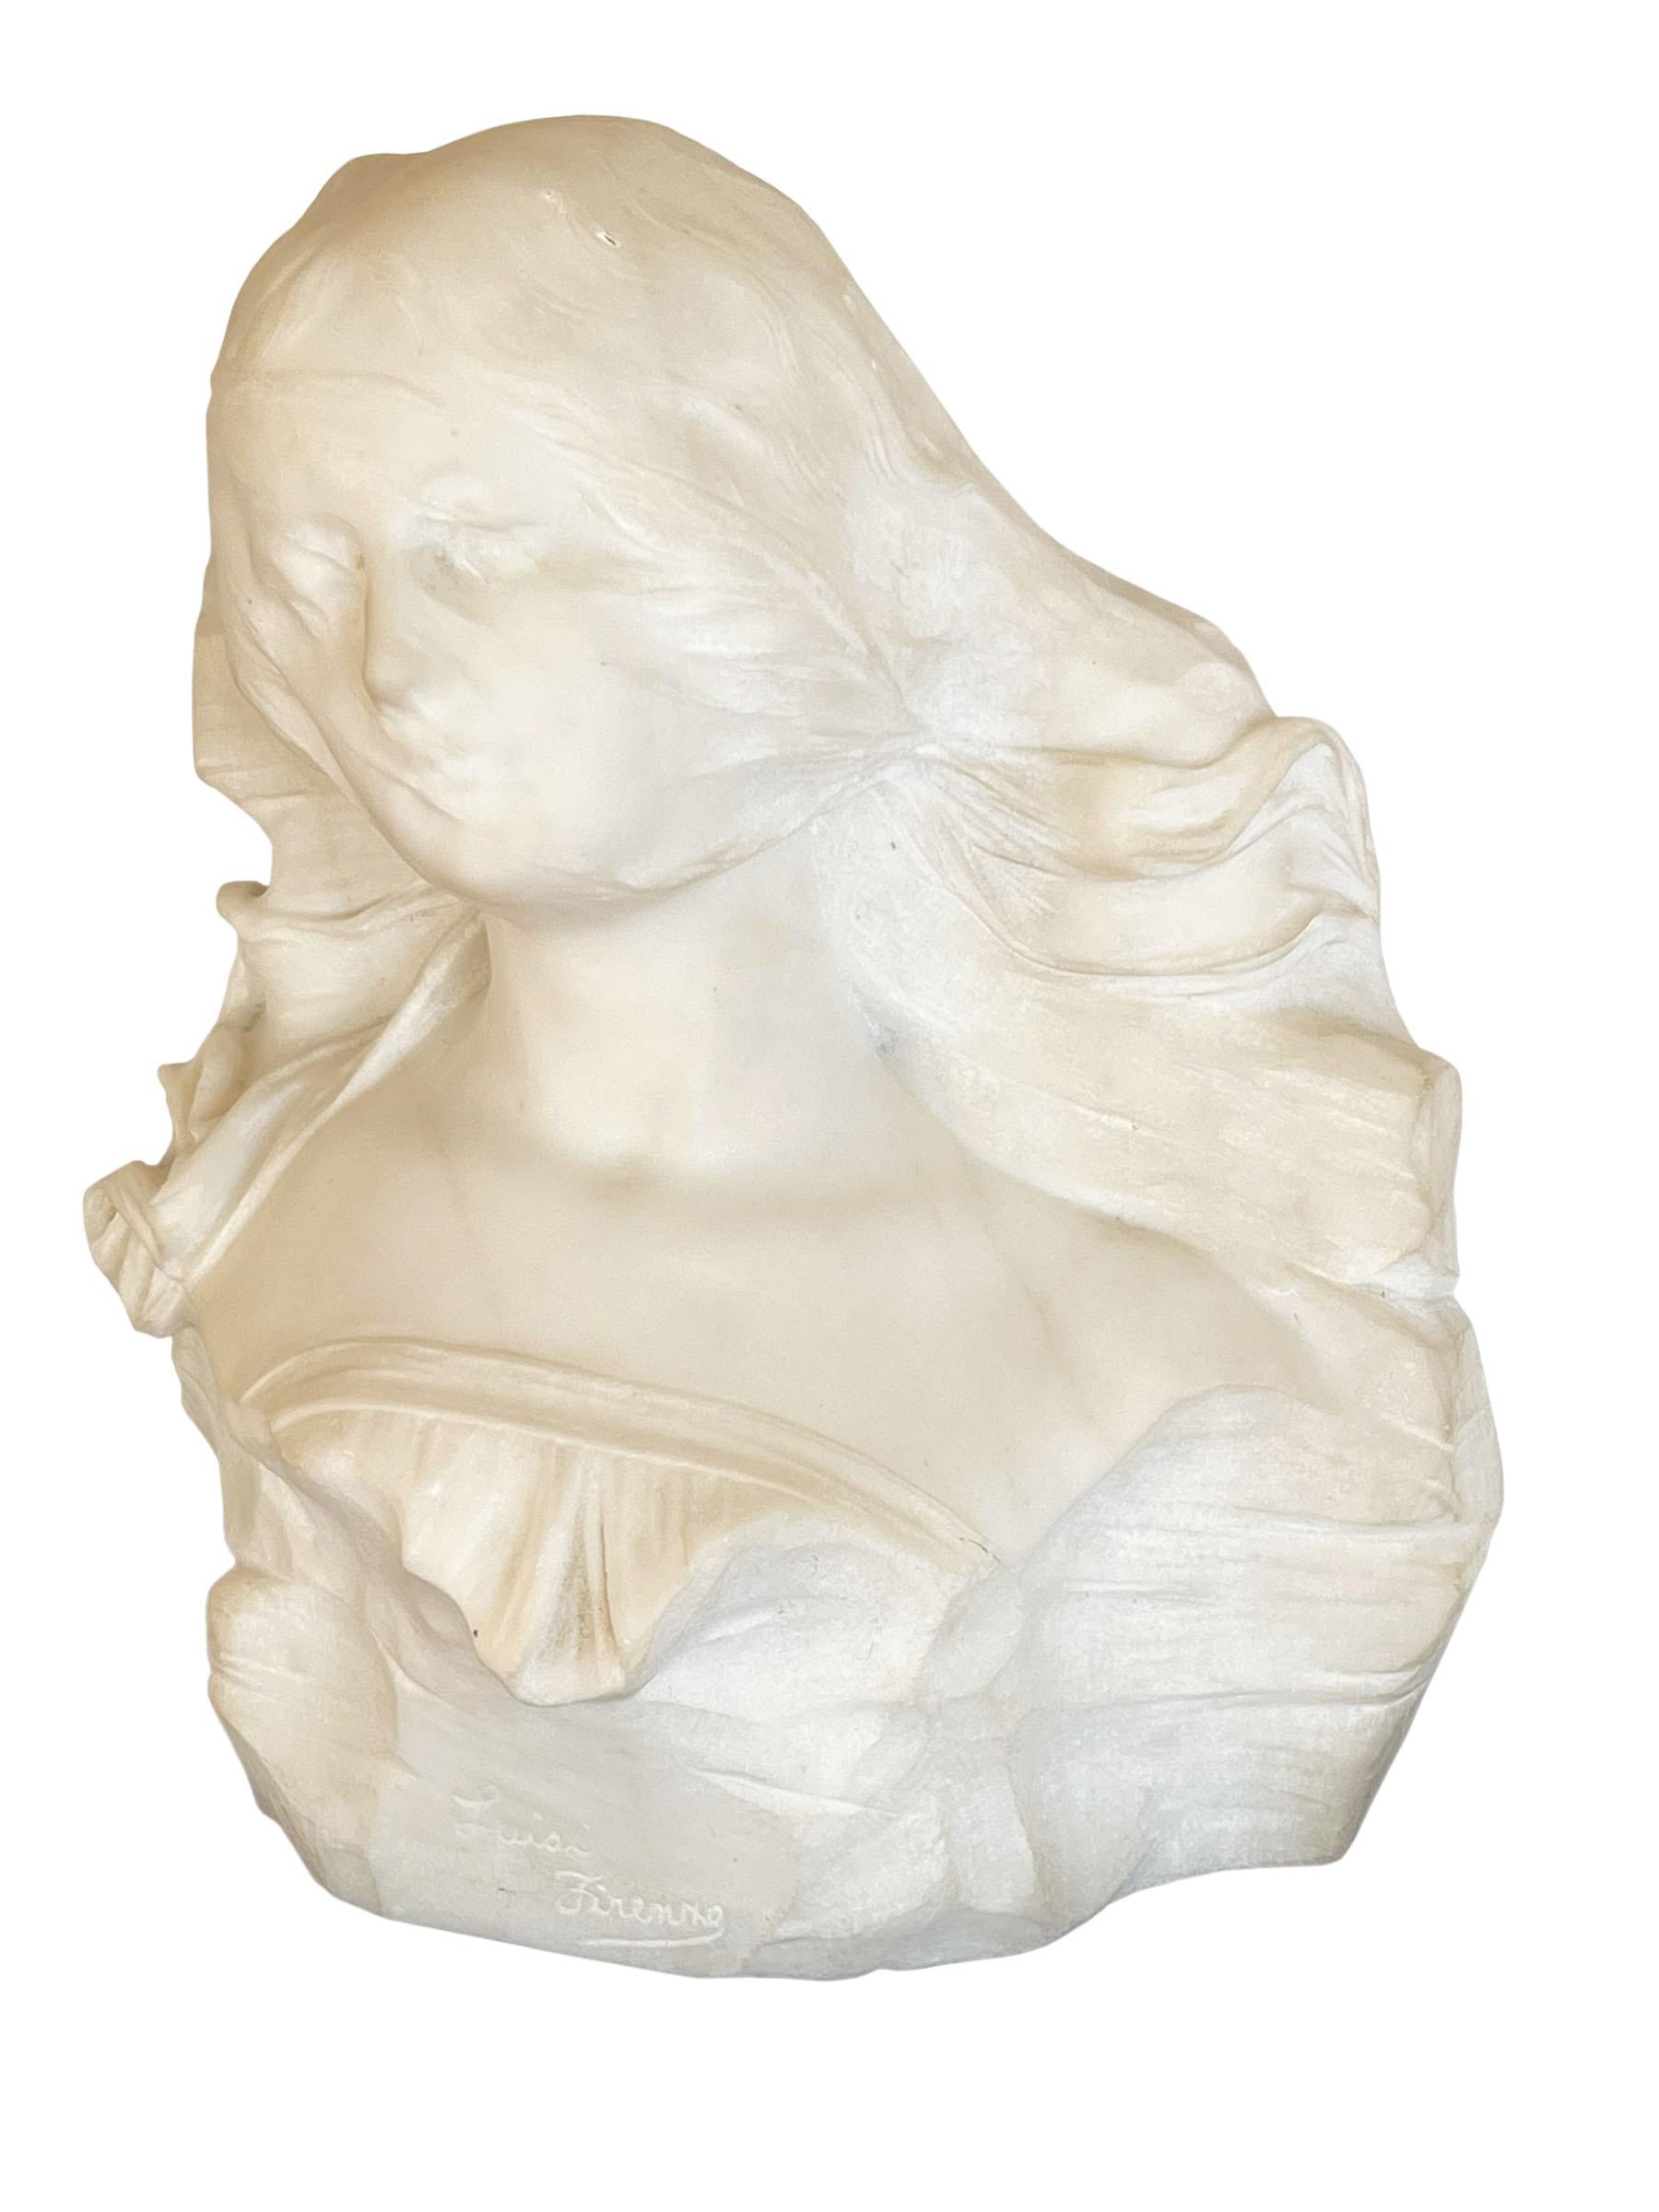 19th Century Italian Marble Bust of a Lady with a Veil In Good Condition For Sale In Clearwater, FL